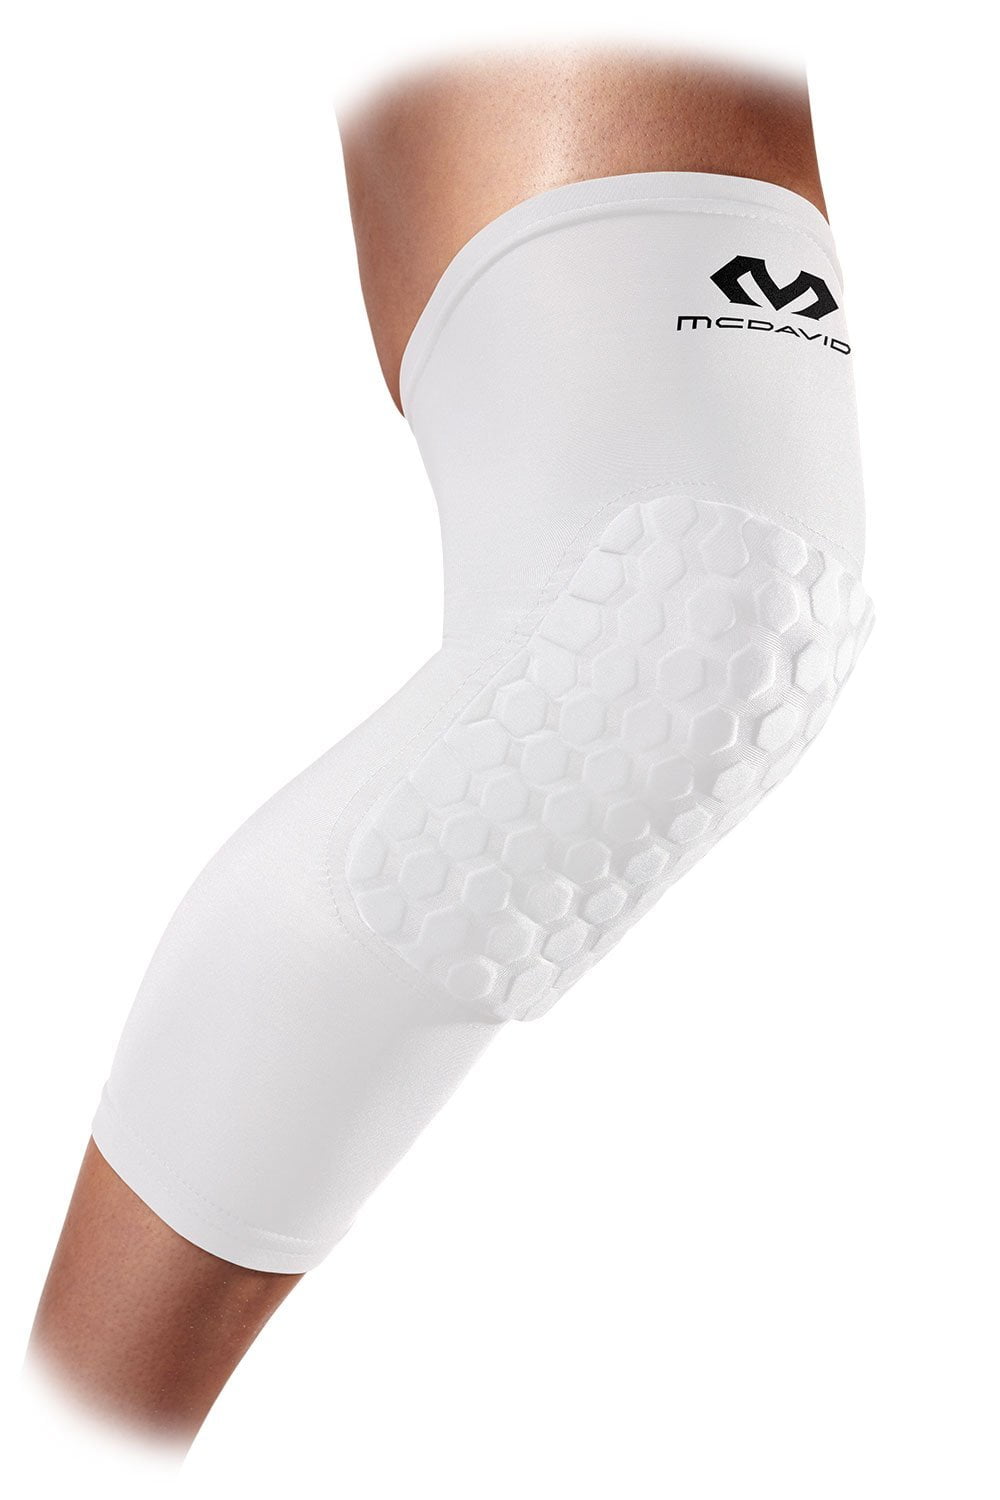 Knee Pad Compression Extended Support Leg Sleeve Hexpad Protective Hex Guard 